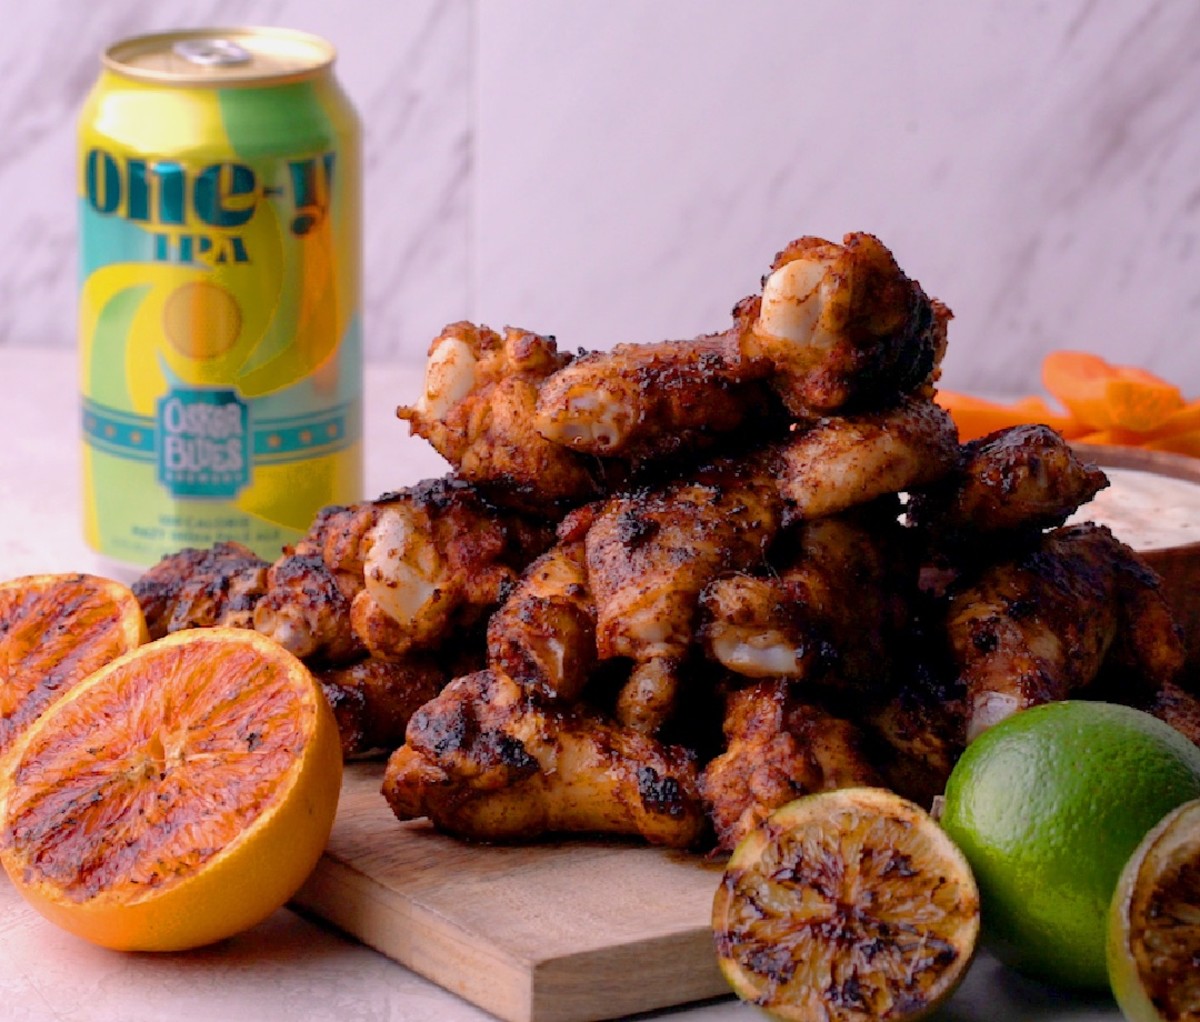 Grilled One-y Citrus Chili Wings